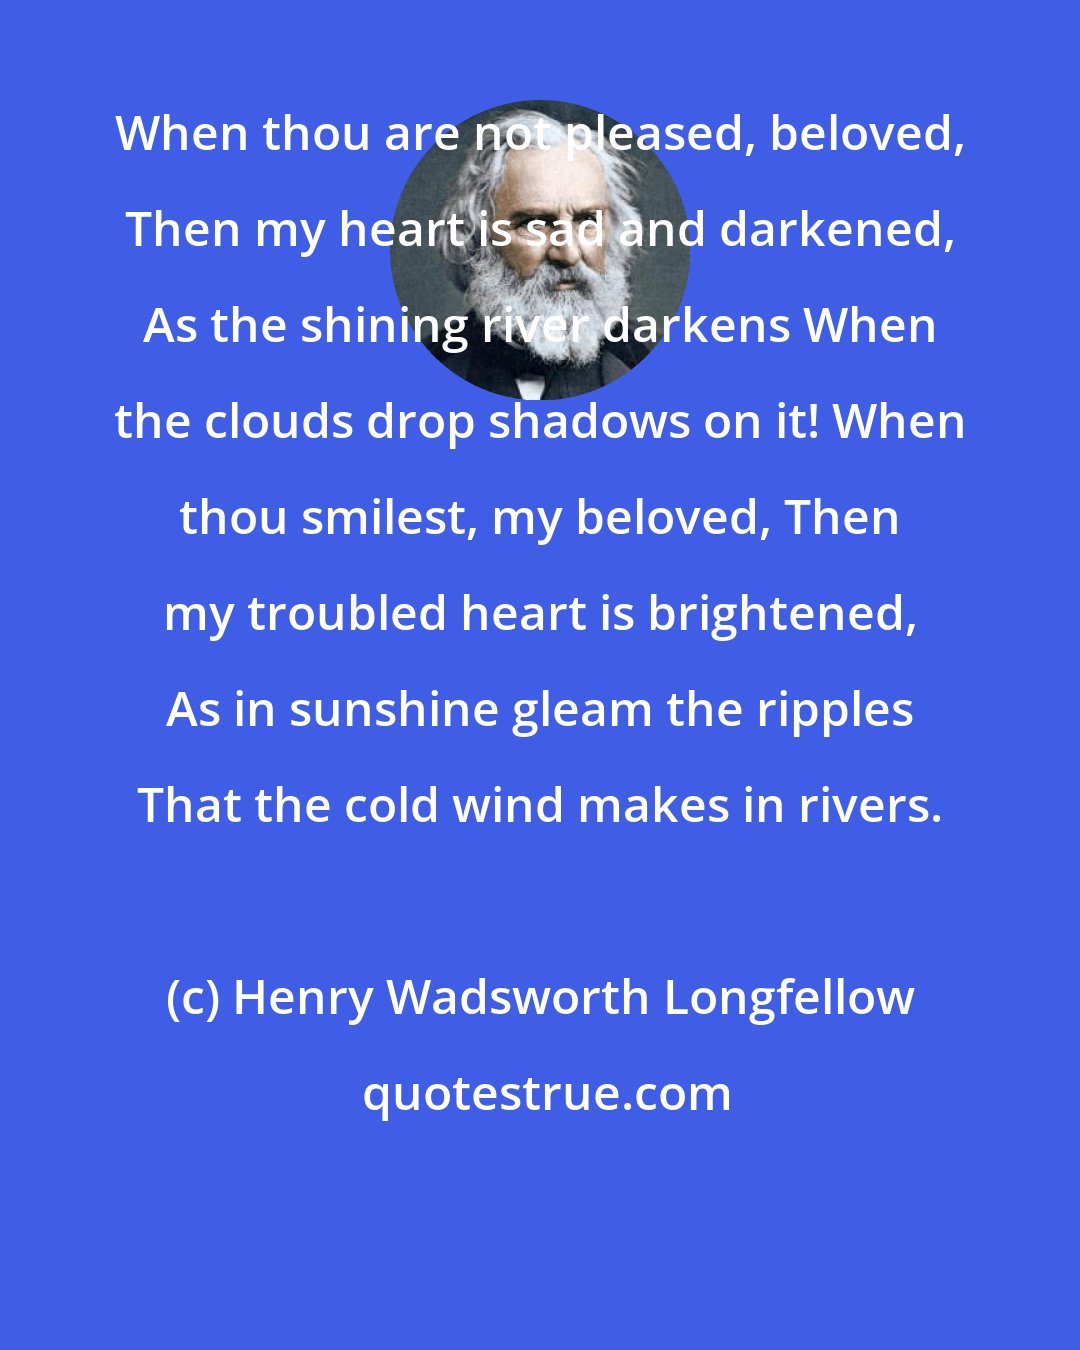 Henry Wadsworth Longfellow: When thou are not pleased, beloved, Then my heart is sad and darkened, As the shining river darkens When the clouds drop shadows on it! When thou smilest, my beloved, Then my troubled heart is brightened, As in sunshine gleam the ripples That the cold wind makes in rivers.